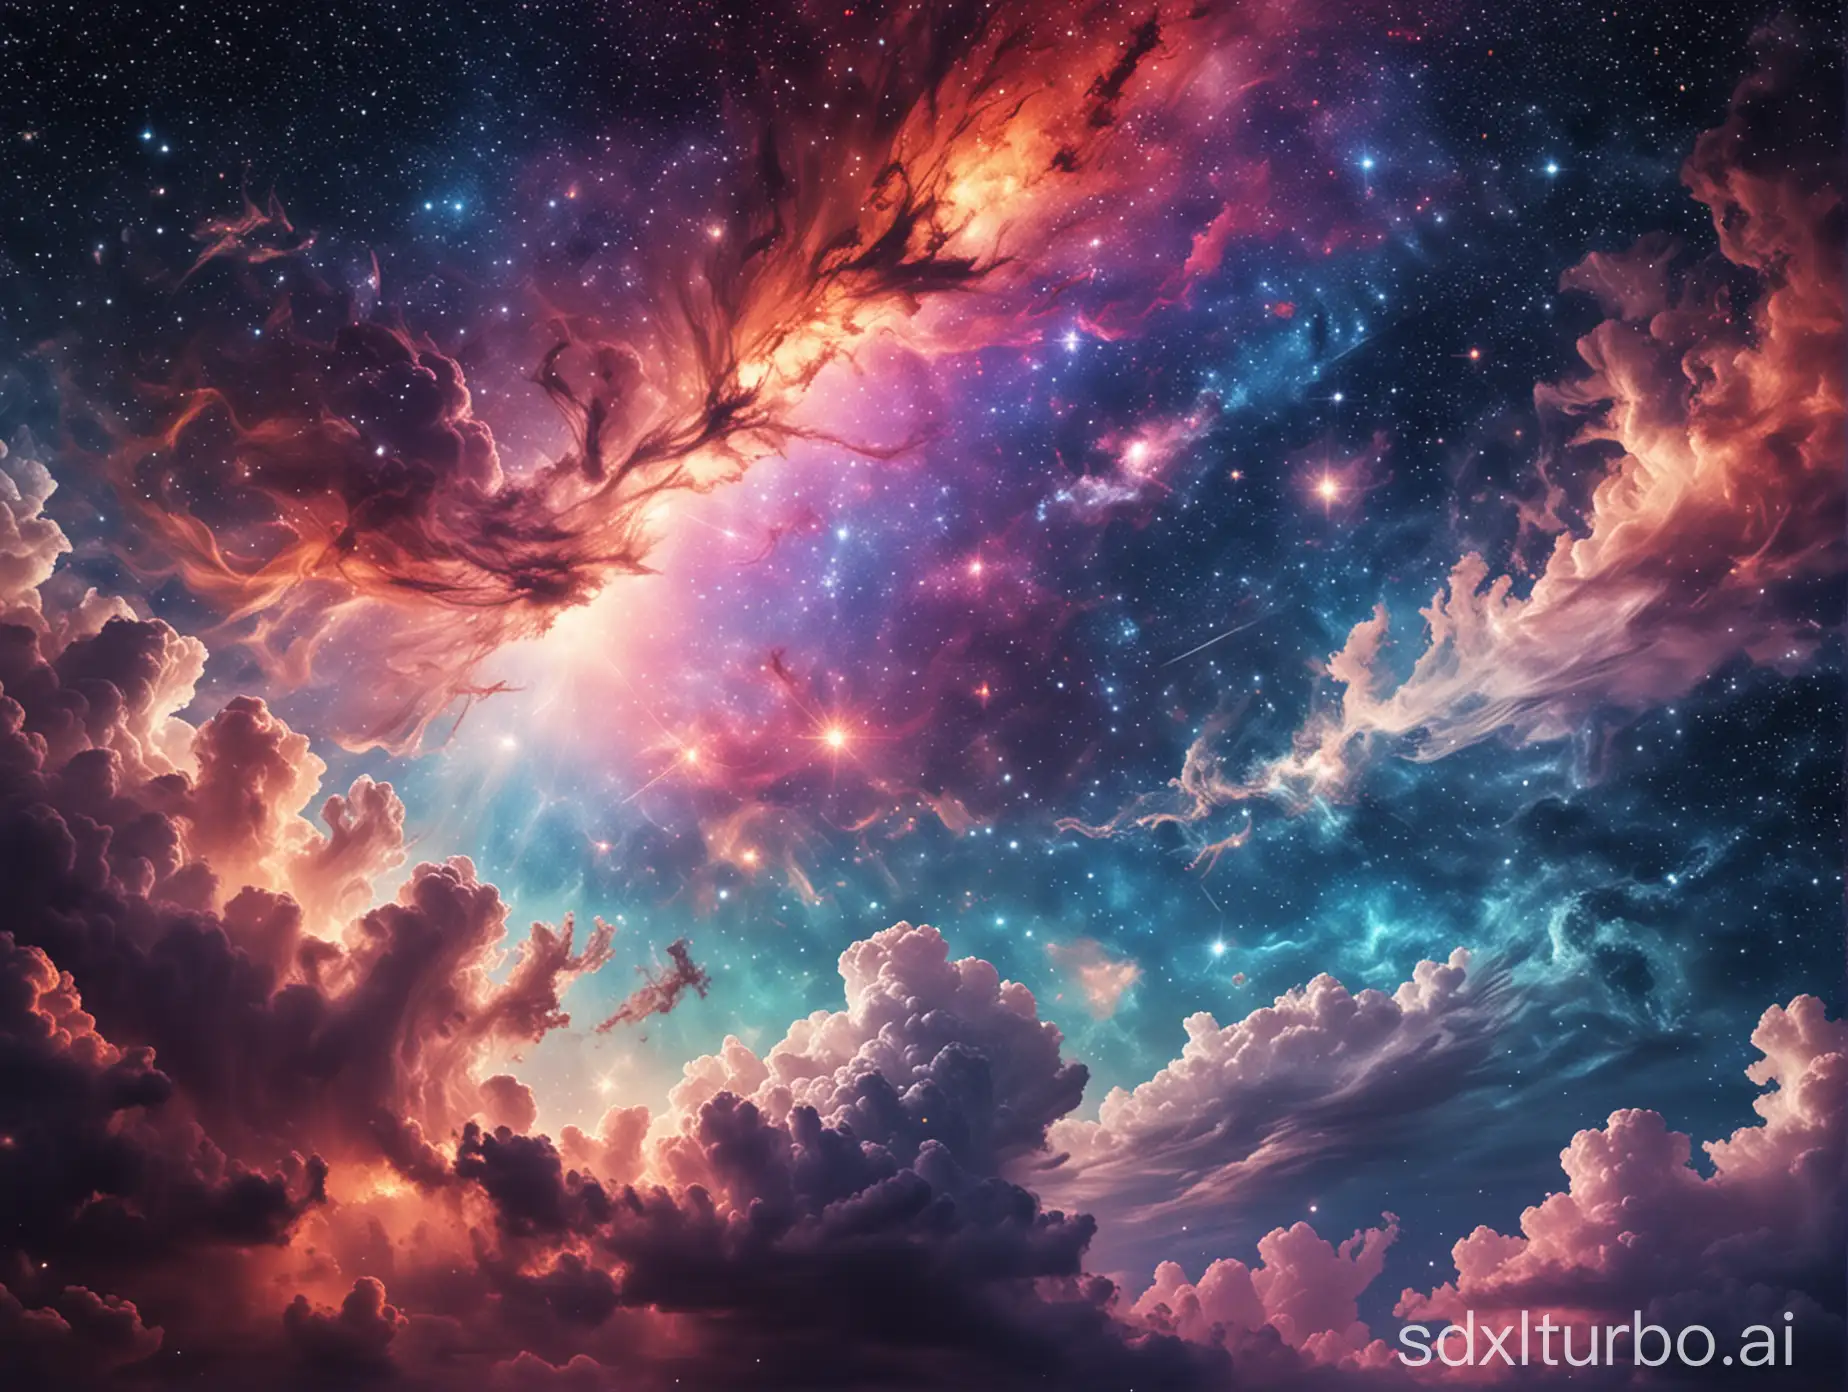 Dreamy-Cosmic-Sky-Surreal-Celestial-Landscape-with-Ethereal-Colors